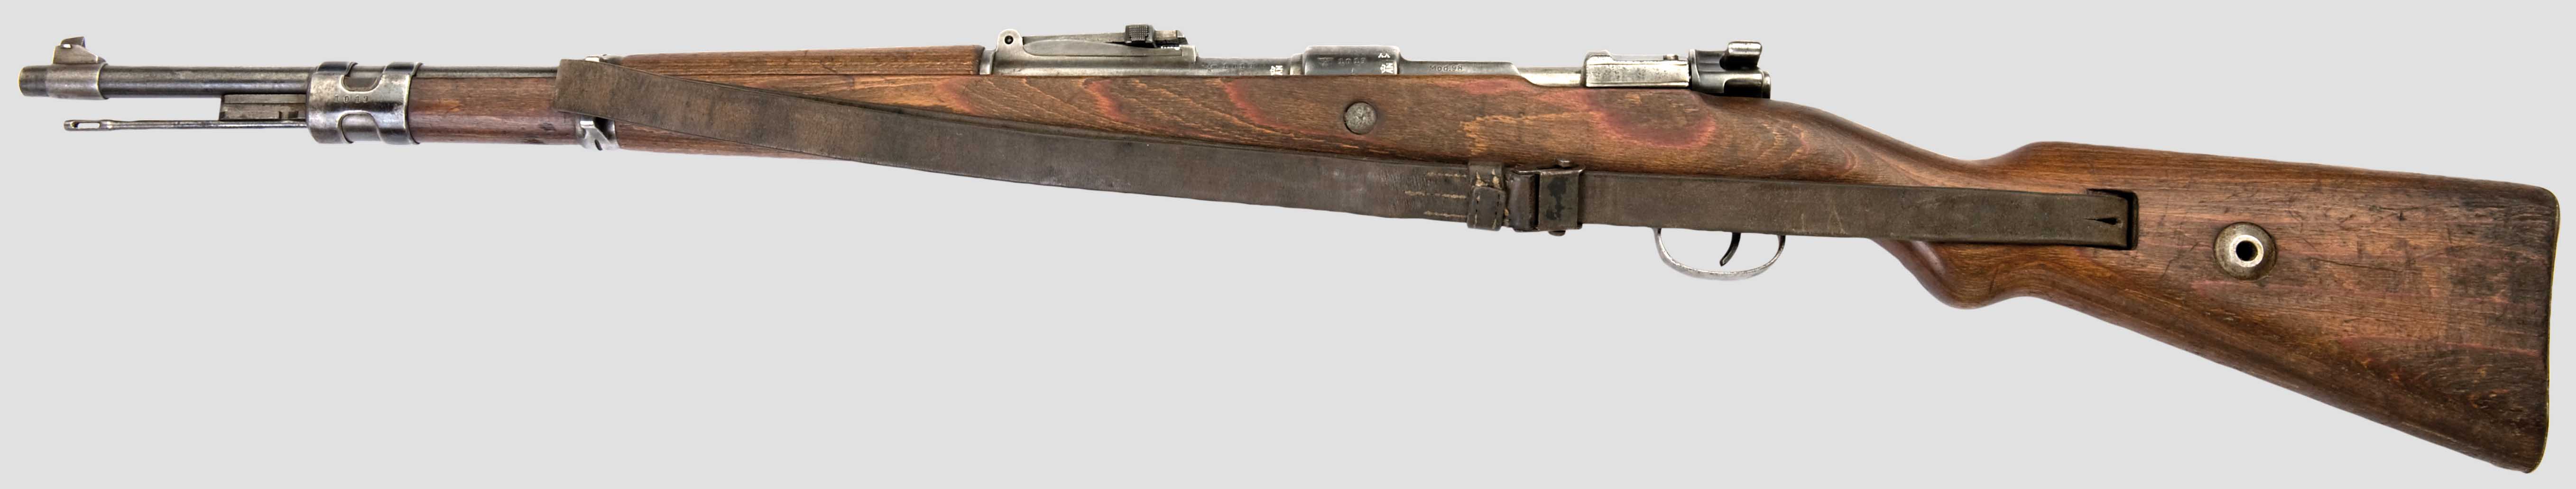 weapons, k98 mauser rifle